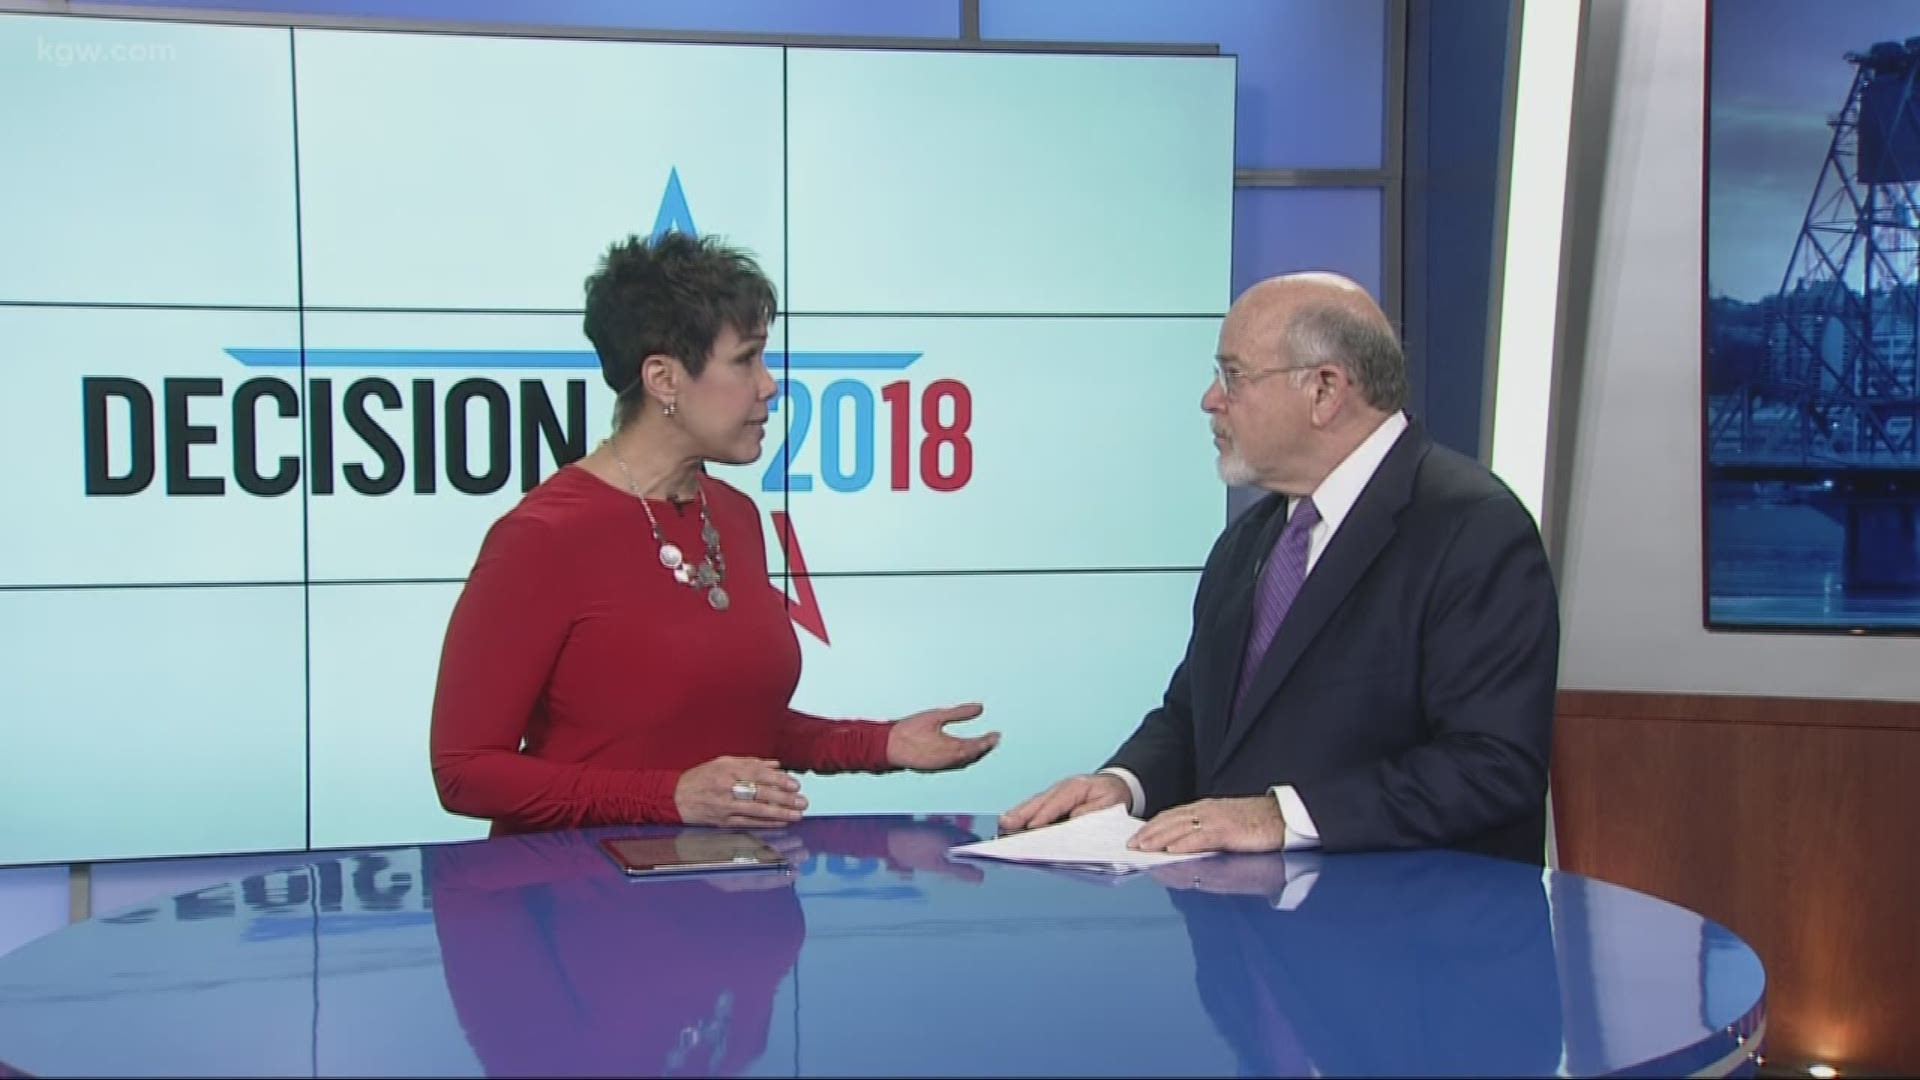 KGW political analyst Len Bergstein joined KGW on Tuesday, Nov. 6, 2018 to break down some of the key things to watch for on Election Day.